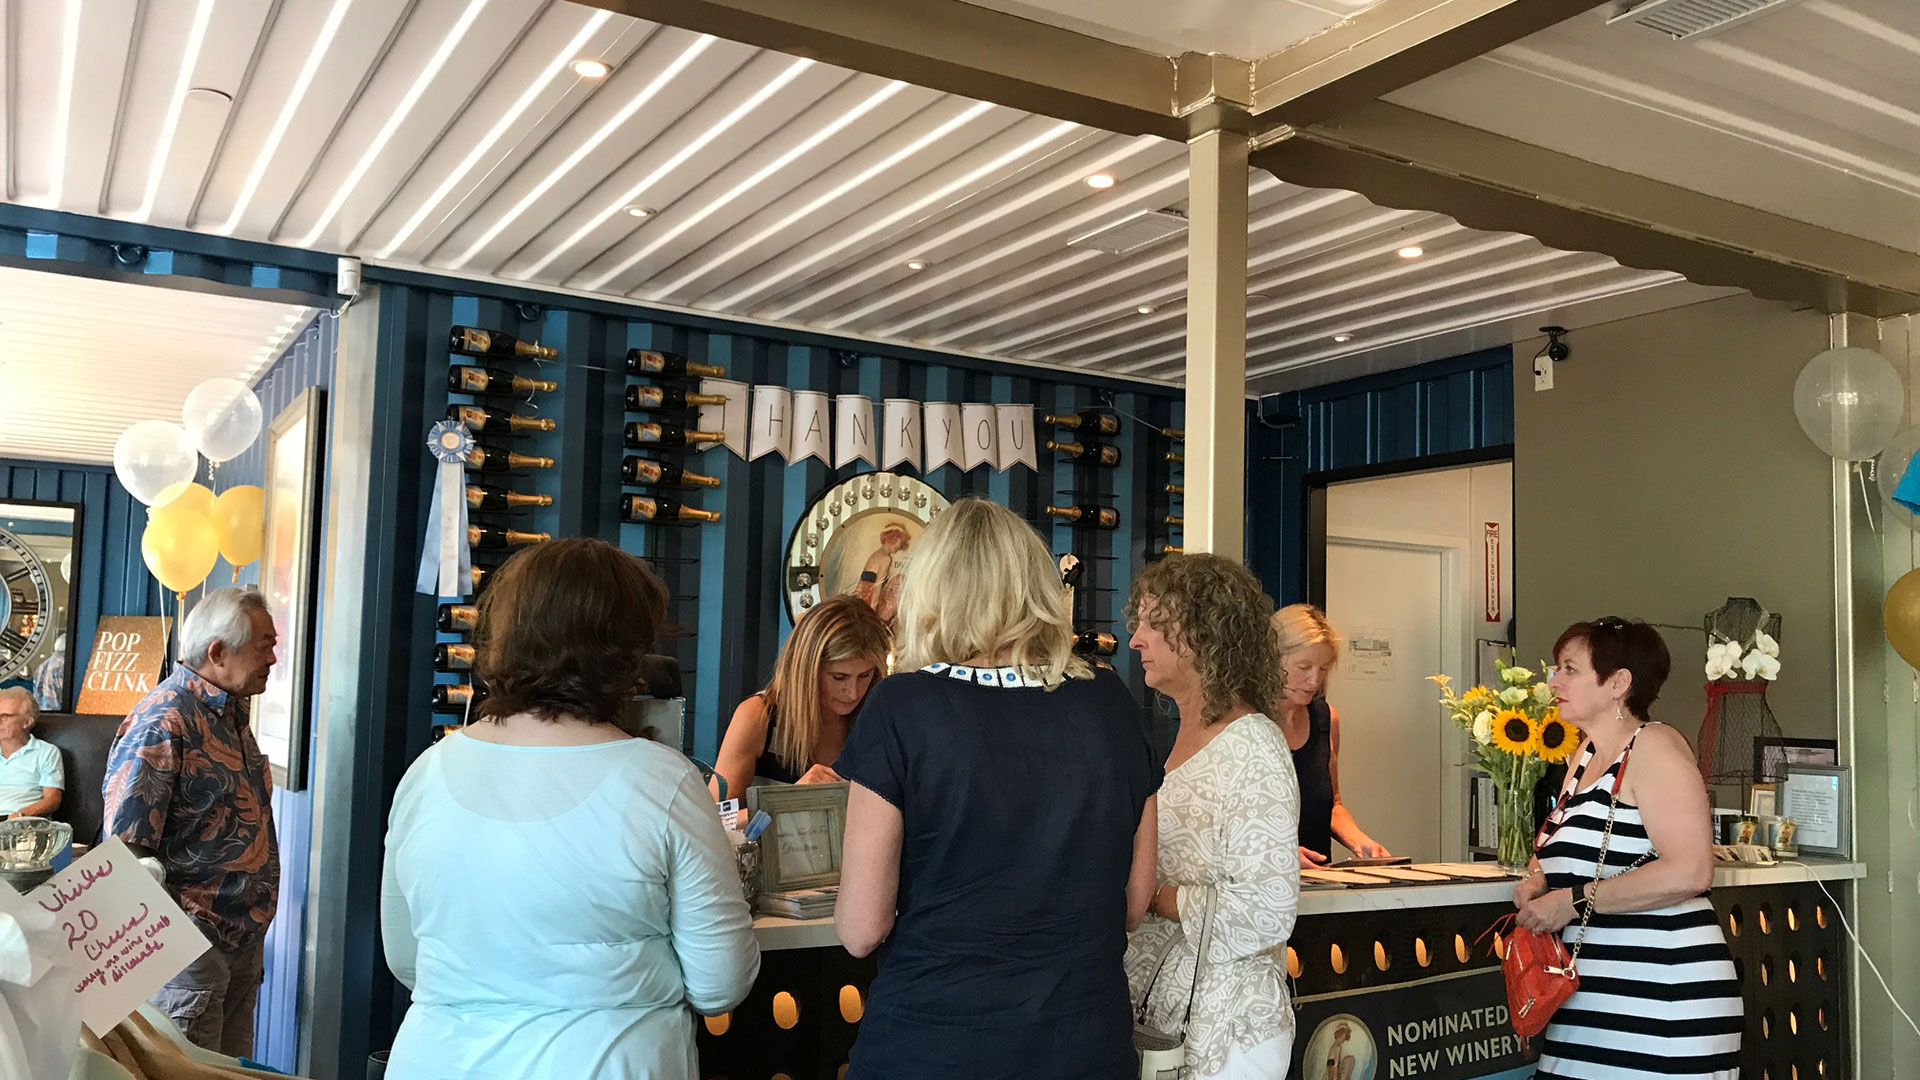 Serving counter in completed tasting room with patrons, currogated blue walls and white ceilings.